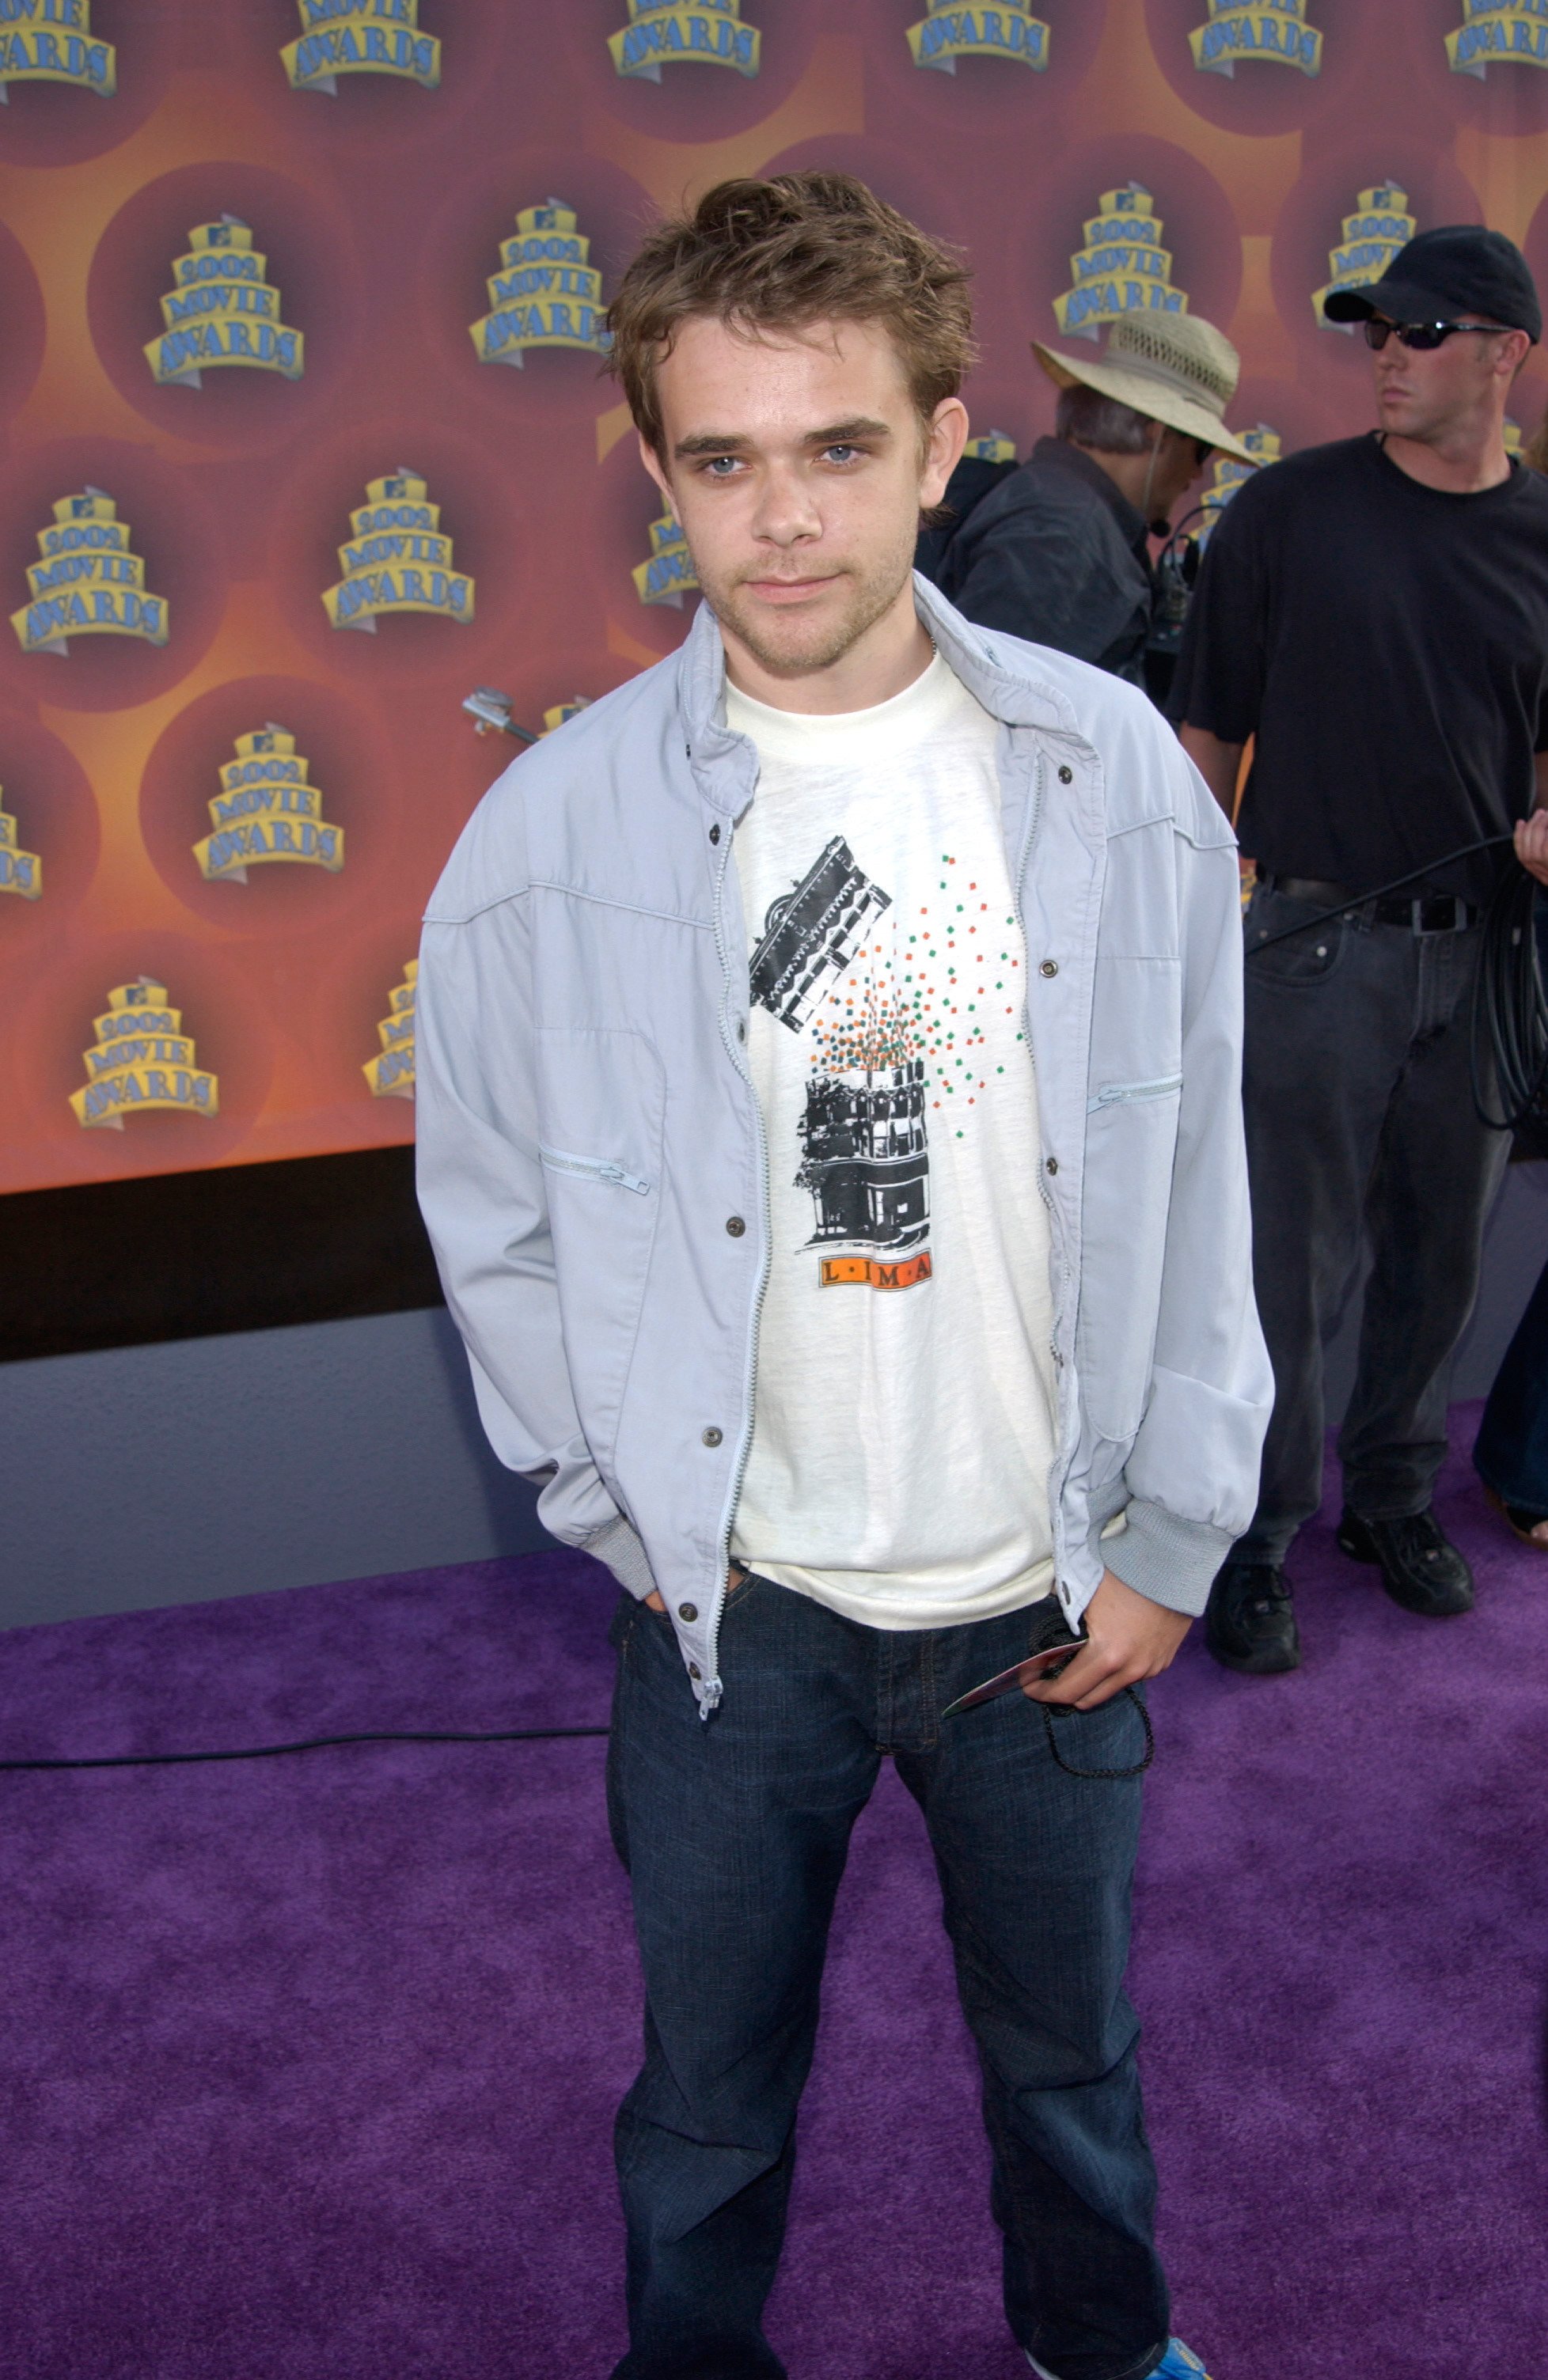 Nick Stahl at the MTV Movie Awards on June 2002 in Los Angeles | Photo: Shutterstock